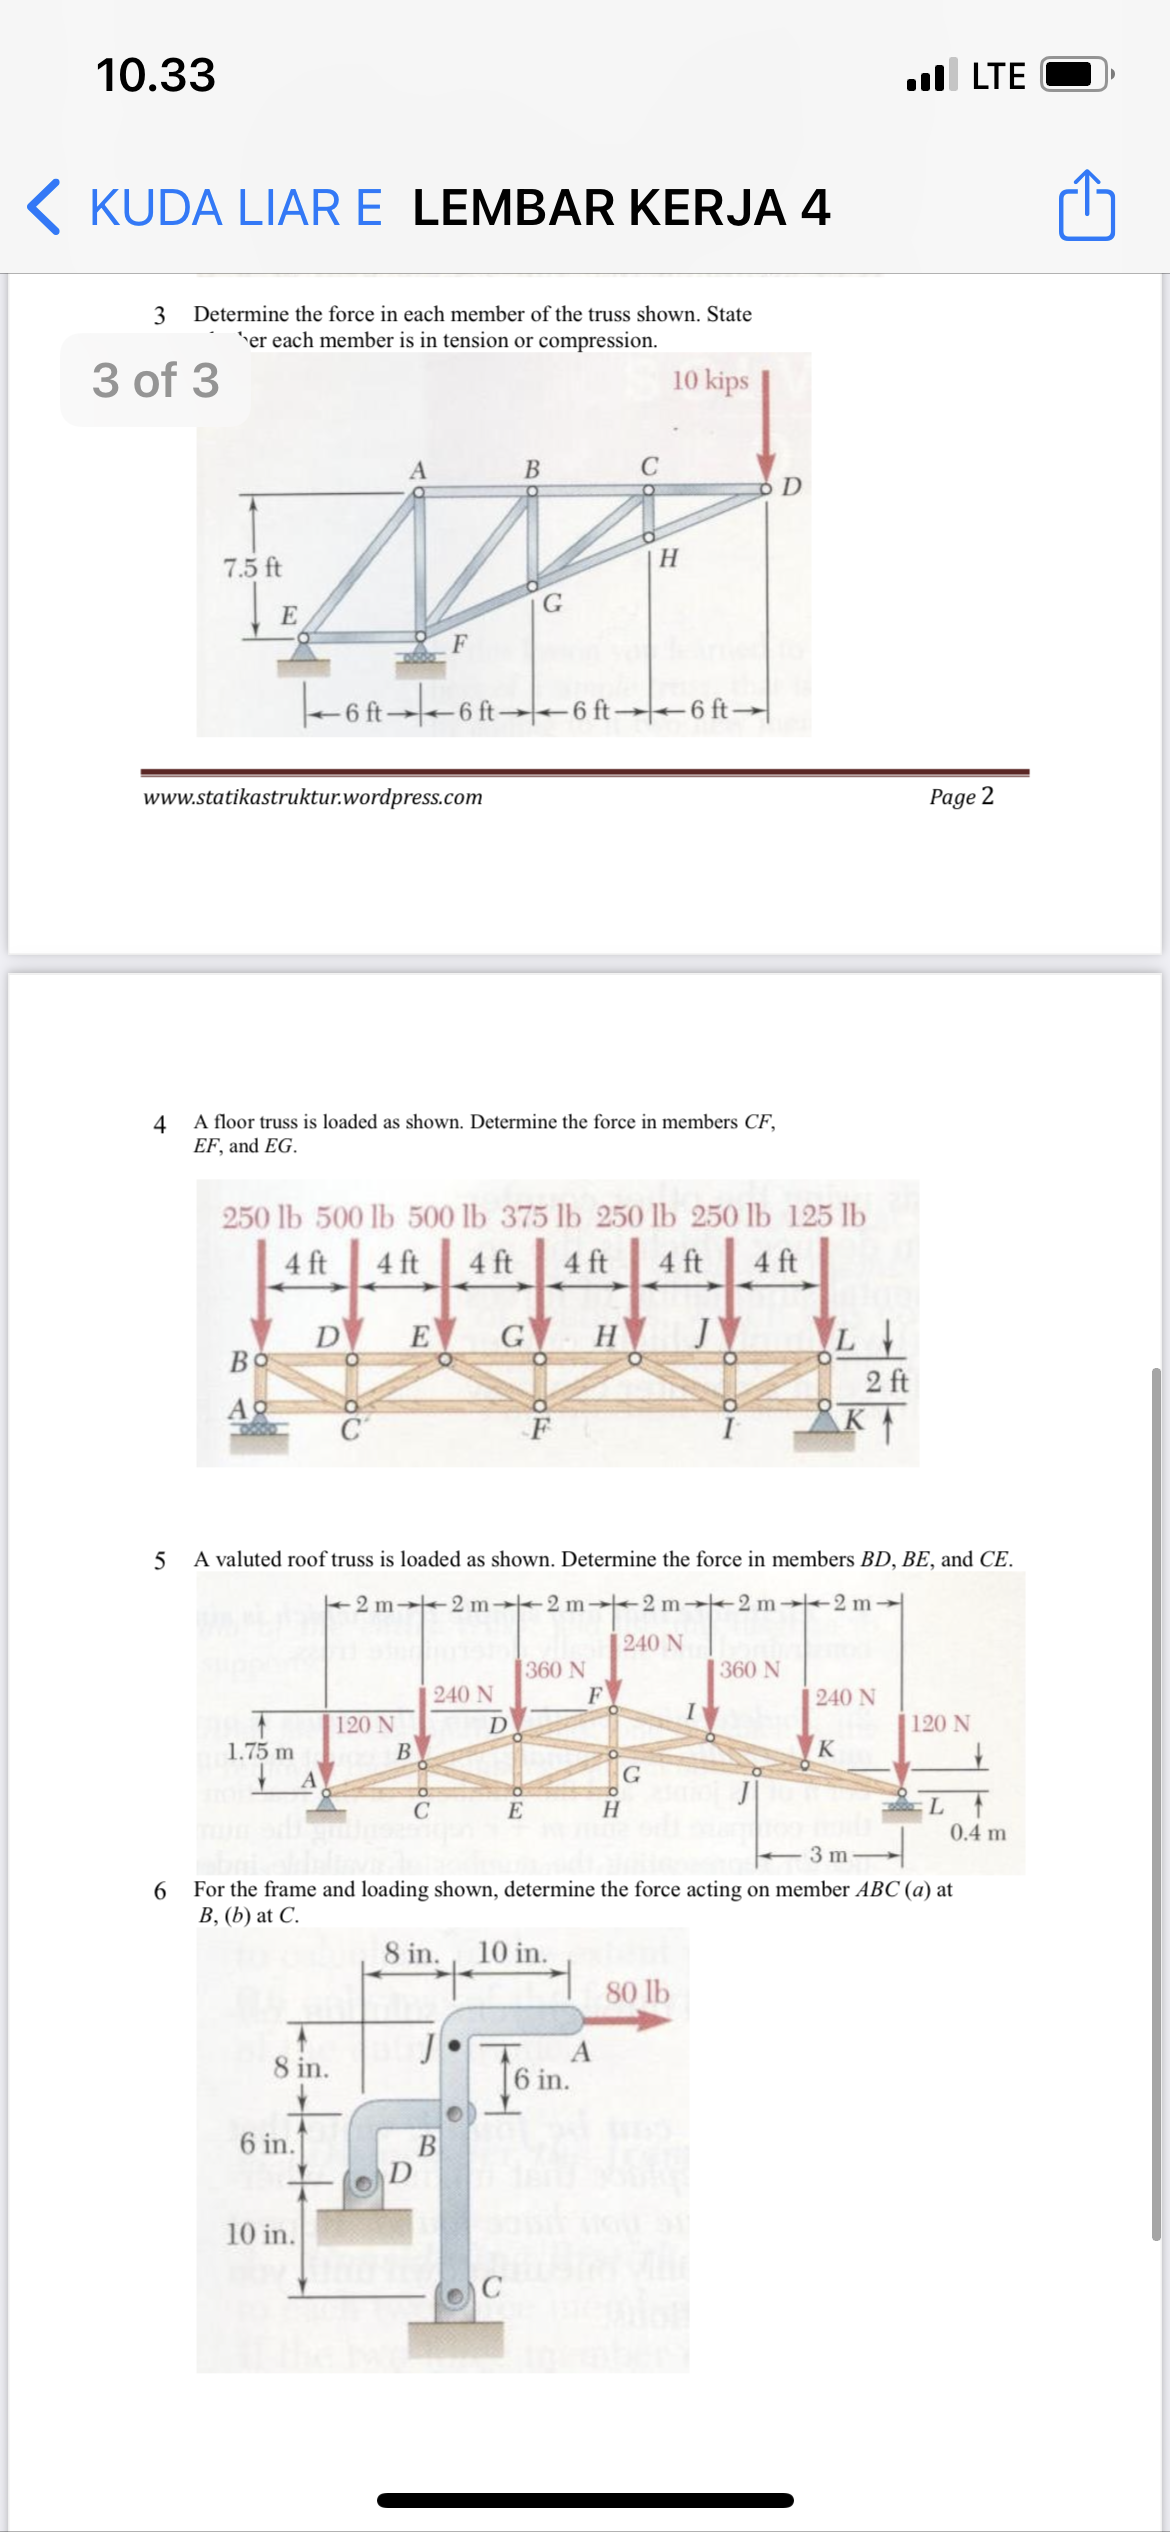 10.33
ull LTE
K KUDA LIAR E LEMBAR KERJA 4
3
Determine the force in each member of the truss shown. State
er each member is in tension or compression.
3 of 3
10 kips
B
7.5 ft
H
G
E
-6 ft--6 ft-6 ft→-6 ft→|
www.statikastruktur.wordpress.com
Page 2
4
A floor truss is loaded as shown. Determine the force in members CF,
EF, and EG.
250 lb 500 lb 500 lb 375 lb 250 lb 250 lb 125 lb
4 ft
4 ft
4 ft
4 ft
4 ft
4 ft
D
Bo
G H
E
2 ft
Ao
C
5 A valuted roof truss is loaded as shown. Determine the force in members BD, BE, and CE.
+2 m 2 m→2 m 2 m-2 m 2 m→
|240 N
360 N
F
360 N
240 N
240 N
120 N
D
120 N
1.75 m
В
K
L
0.4 m
C
E
3 m
6
For the frame and loading shown, determine the force acting on member ABC (a) at
В, (Ь) at C.
8 in.
10 in.
80 lb
8 in.
A
6 in.
6 in.
B
10 in.
